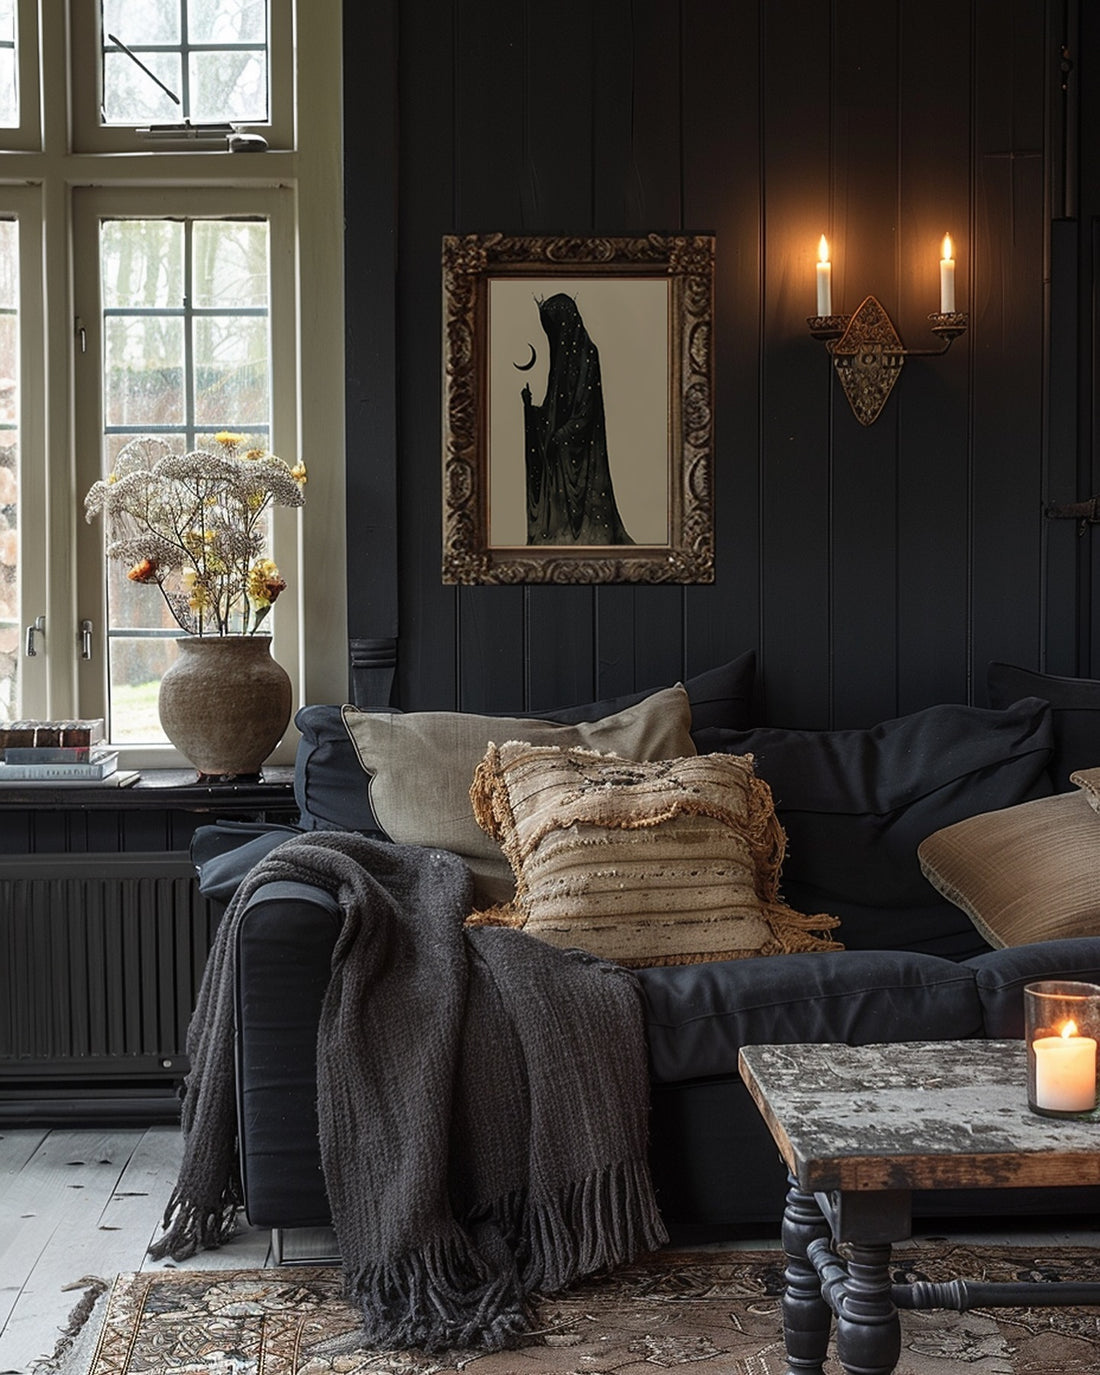 Dark, Gothic, Occult Home Decor | Old Town Magick